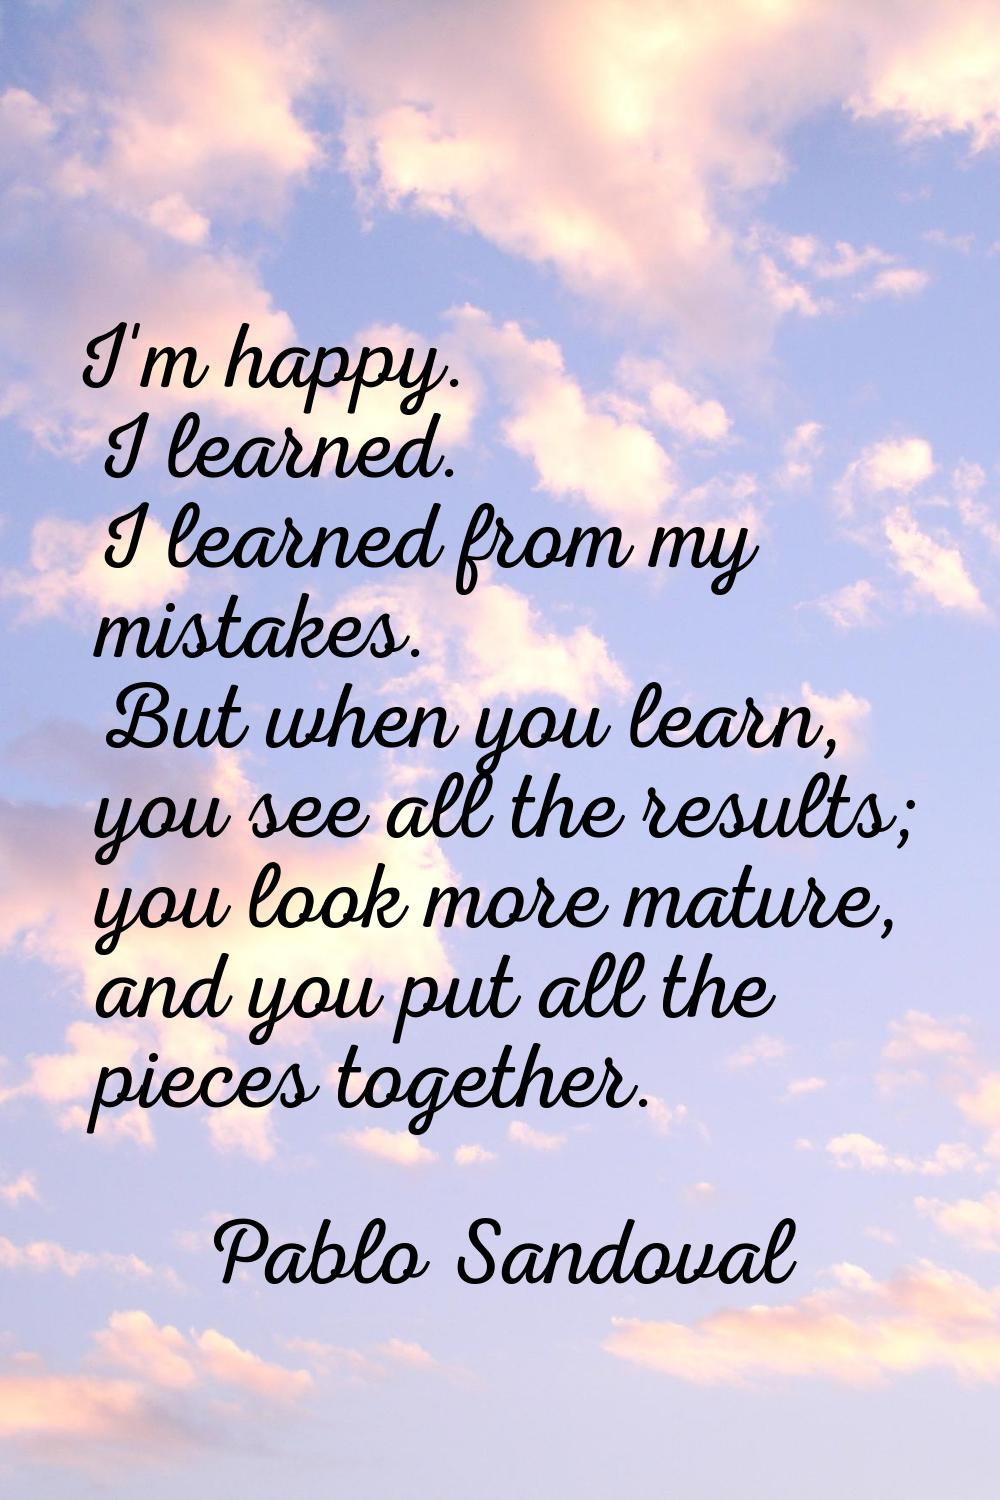 I'm happy. I learned. I learned from my mistakes. But when you learn, you see all the results; you 